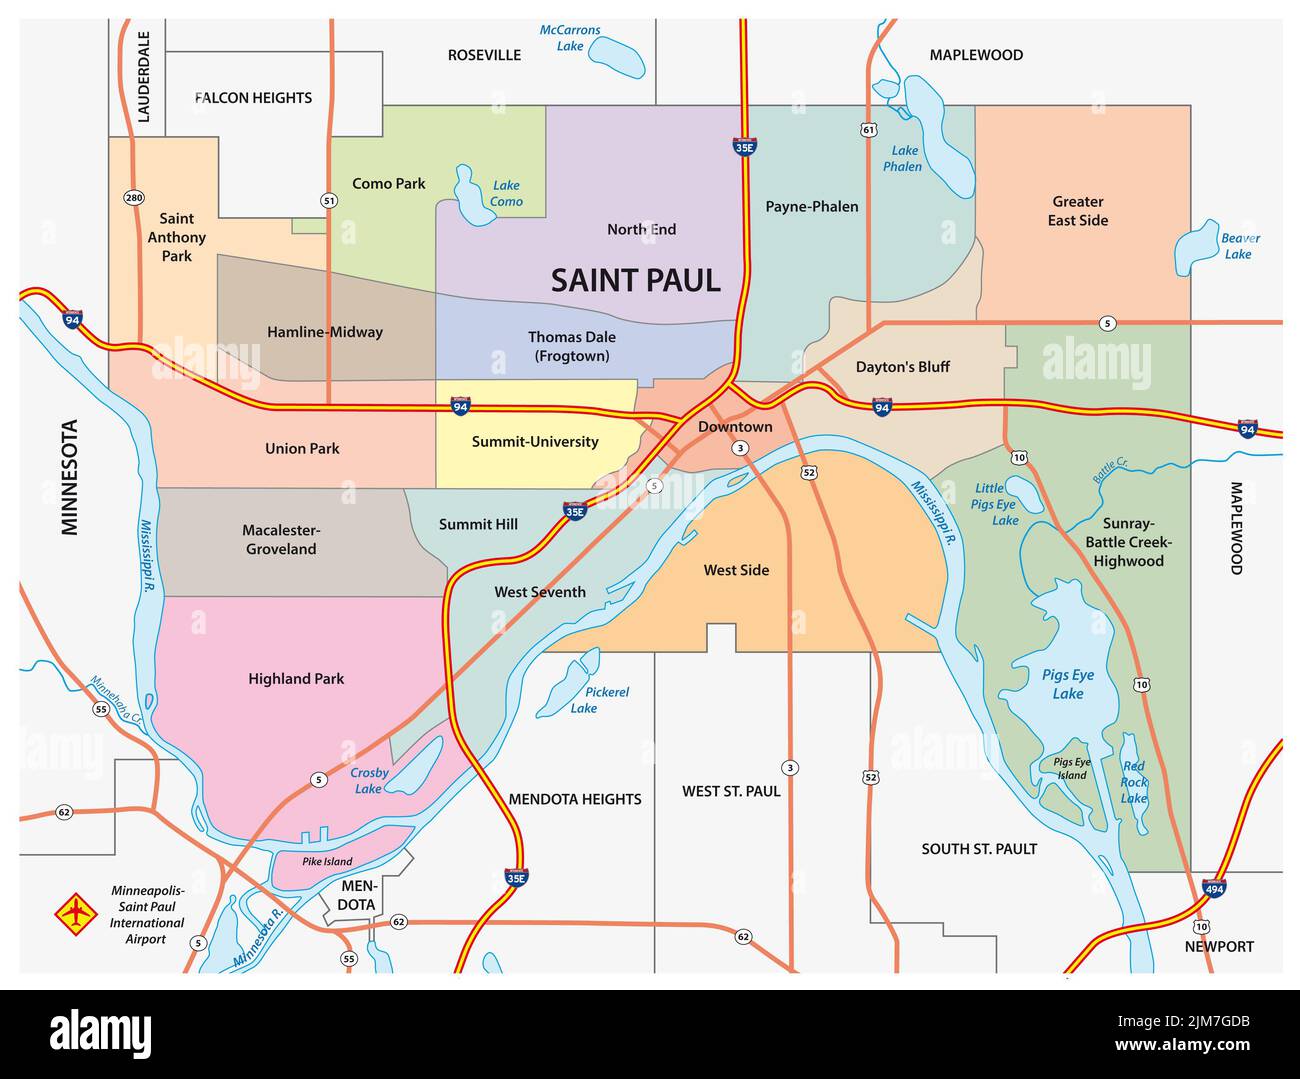 Administrative and road map of Saint Paul, Minnesota, United States Stock Photo